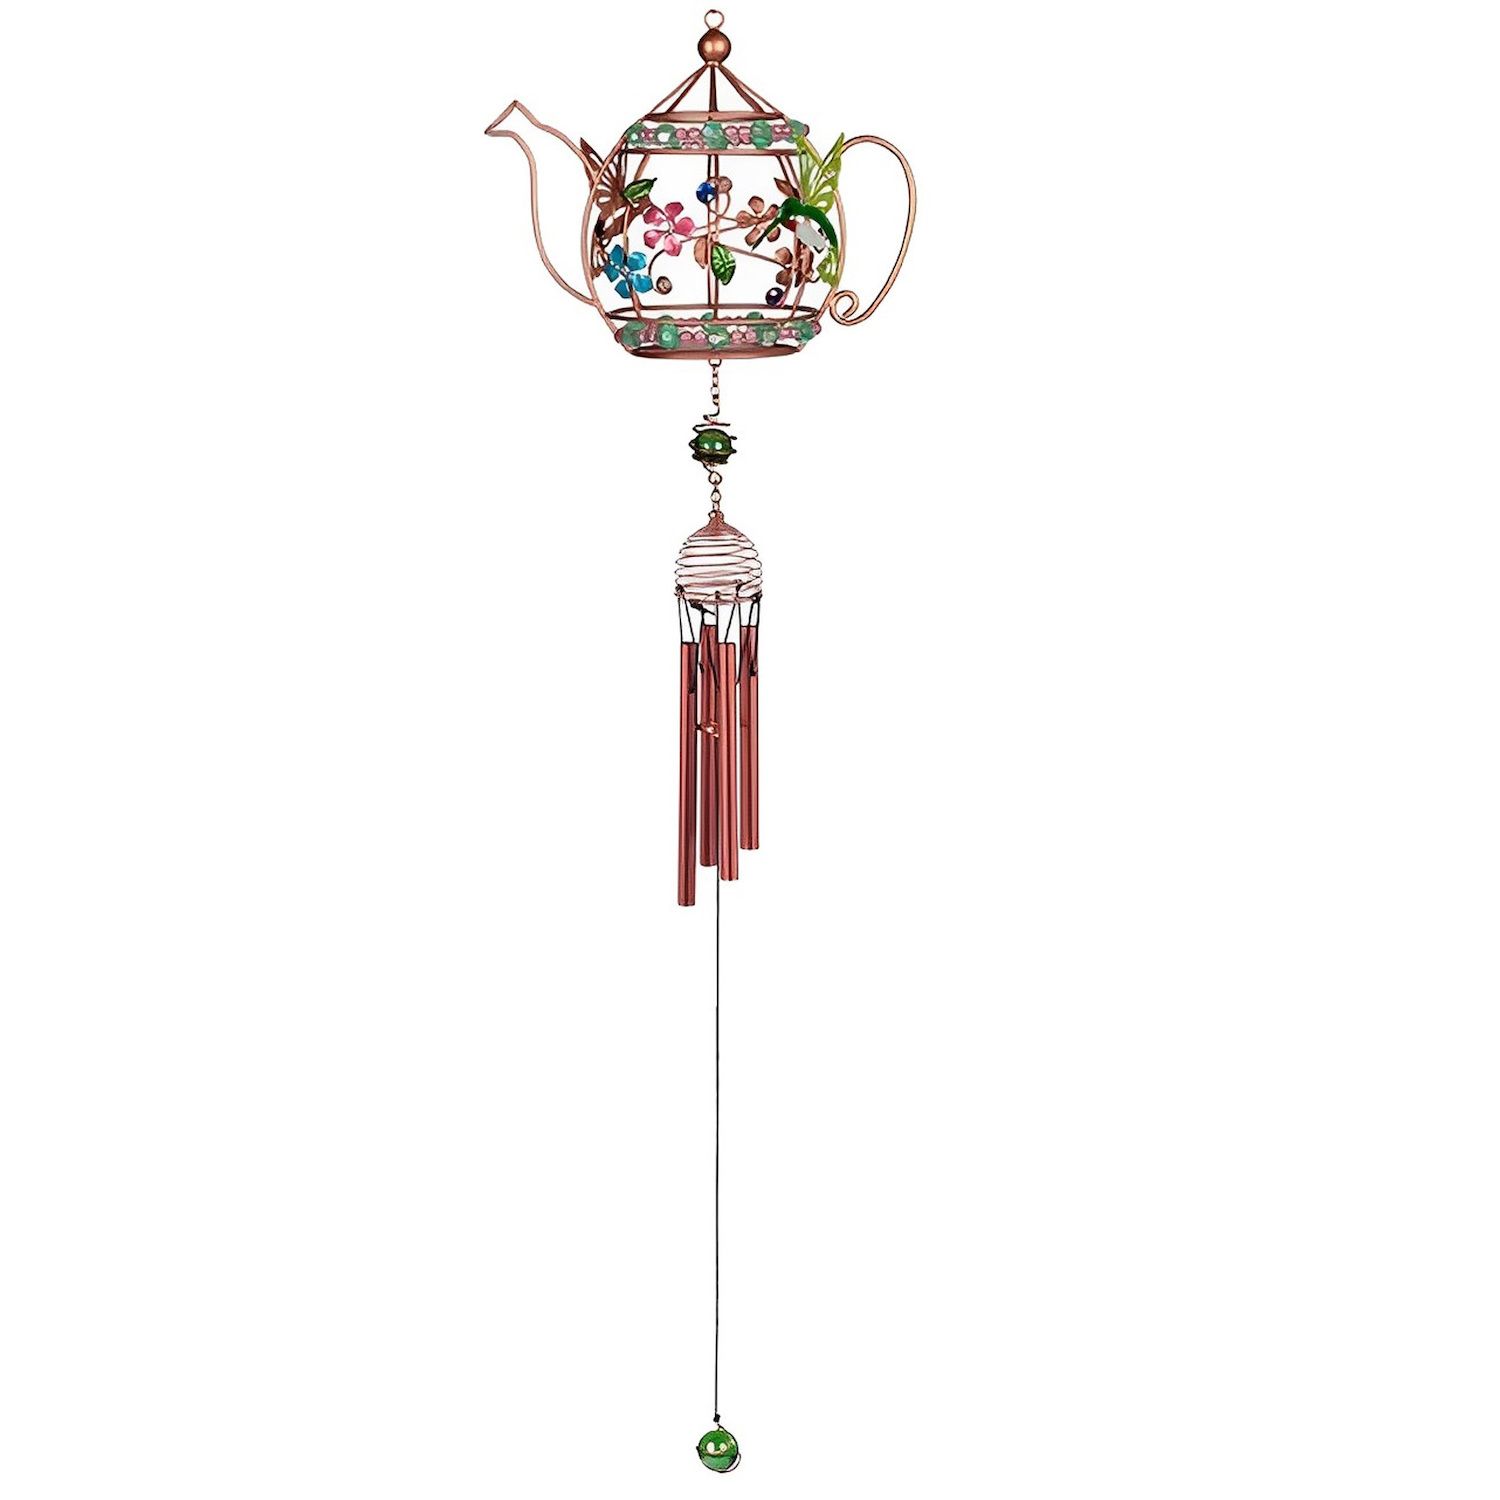 Exhart WindyWing Pink and Green Hummingbird Wind Chimes 40172 - The Home  Depot